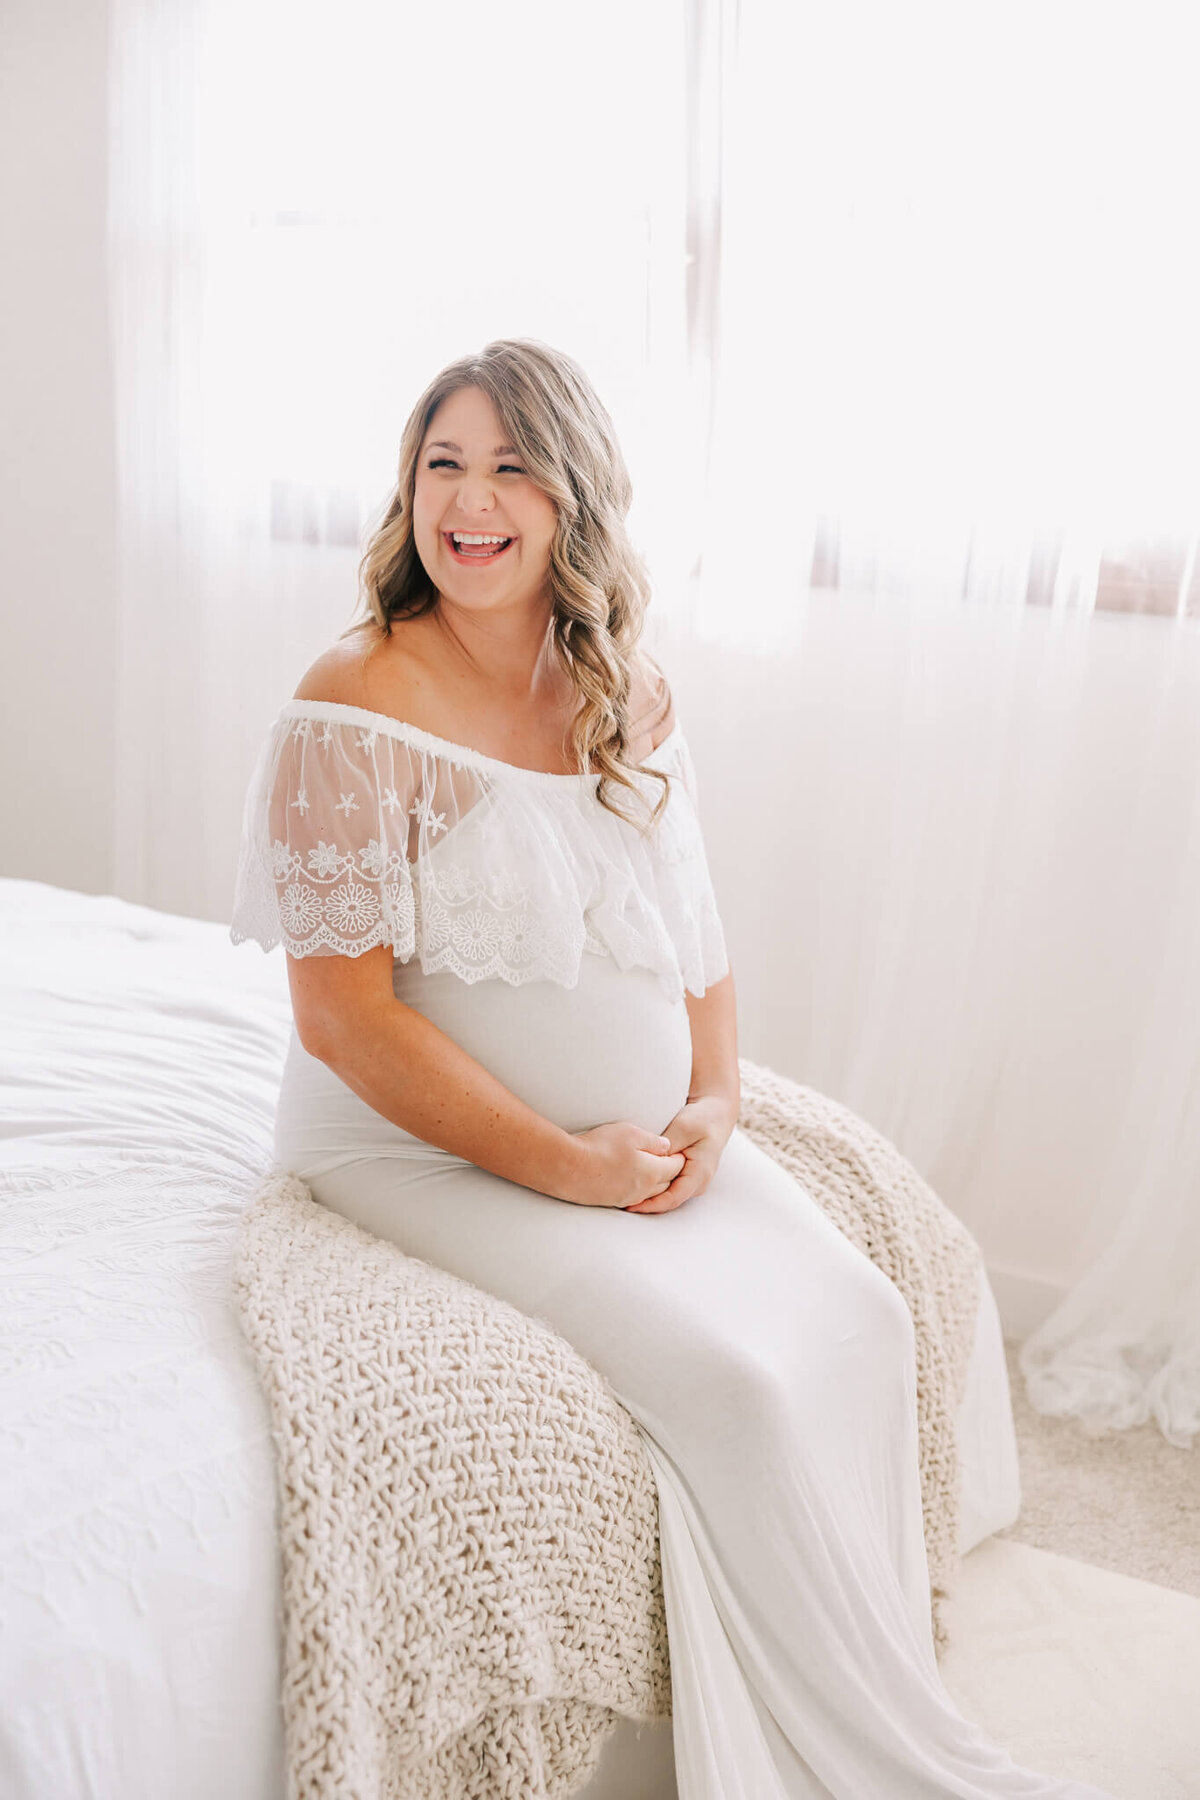 beautiful portrait of a woman smiling and laughing while sitting on a bed for her maternity session